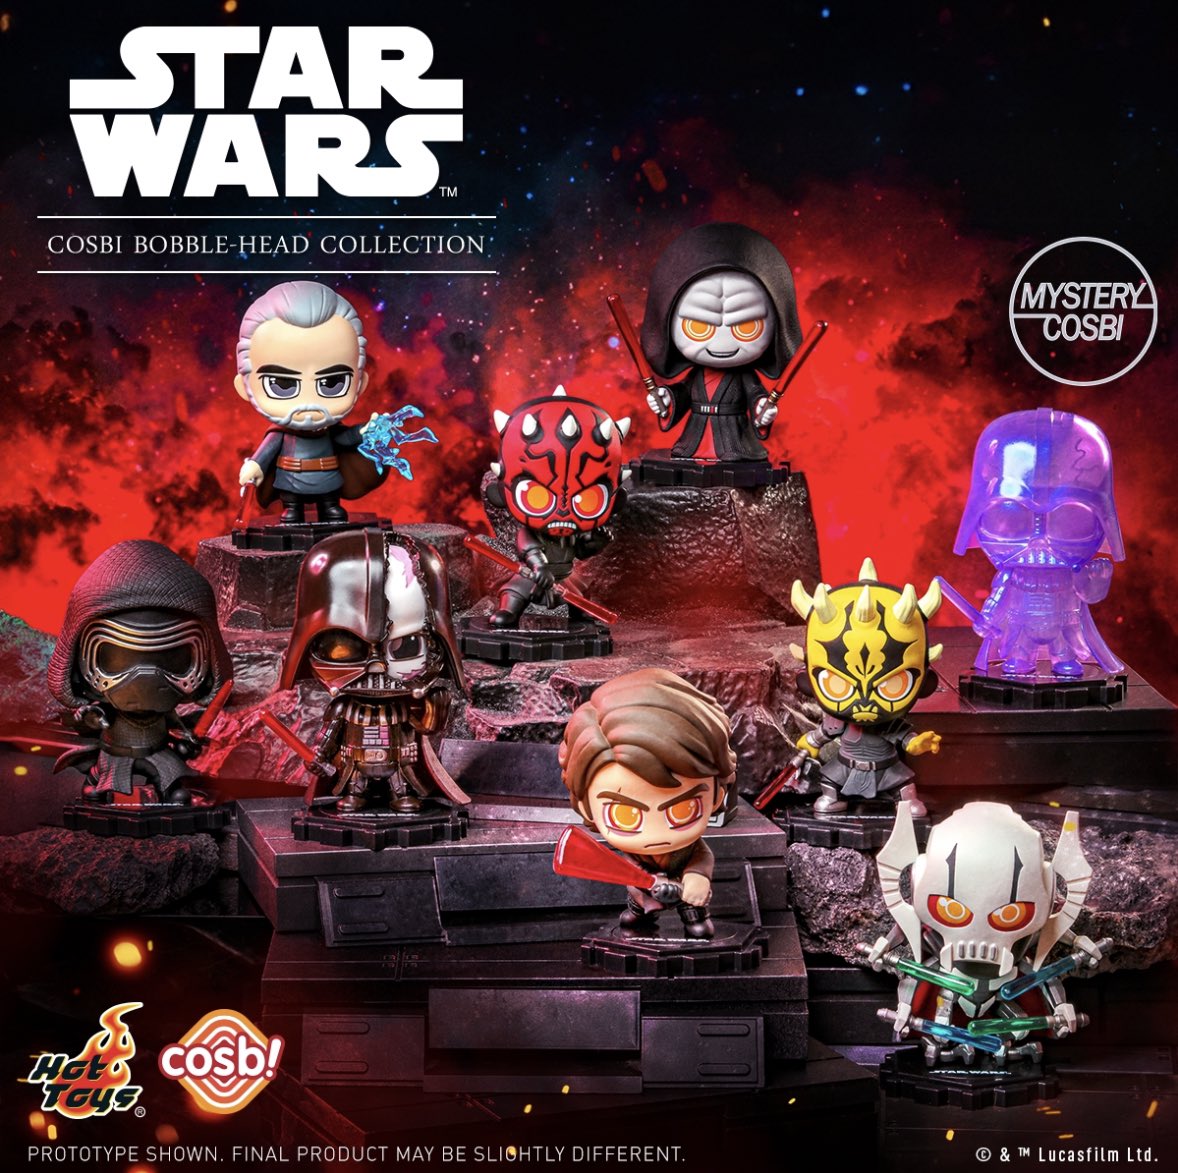 Hot Toys reveals their May 4th Cosbi Star Wars collection! #FPN #FunkoPOPNews #HotToys #Cosbi #Cosbaby #StarWars